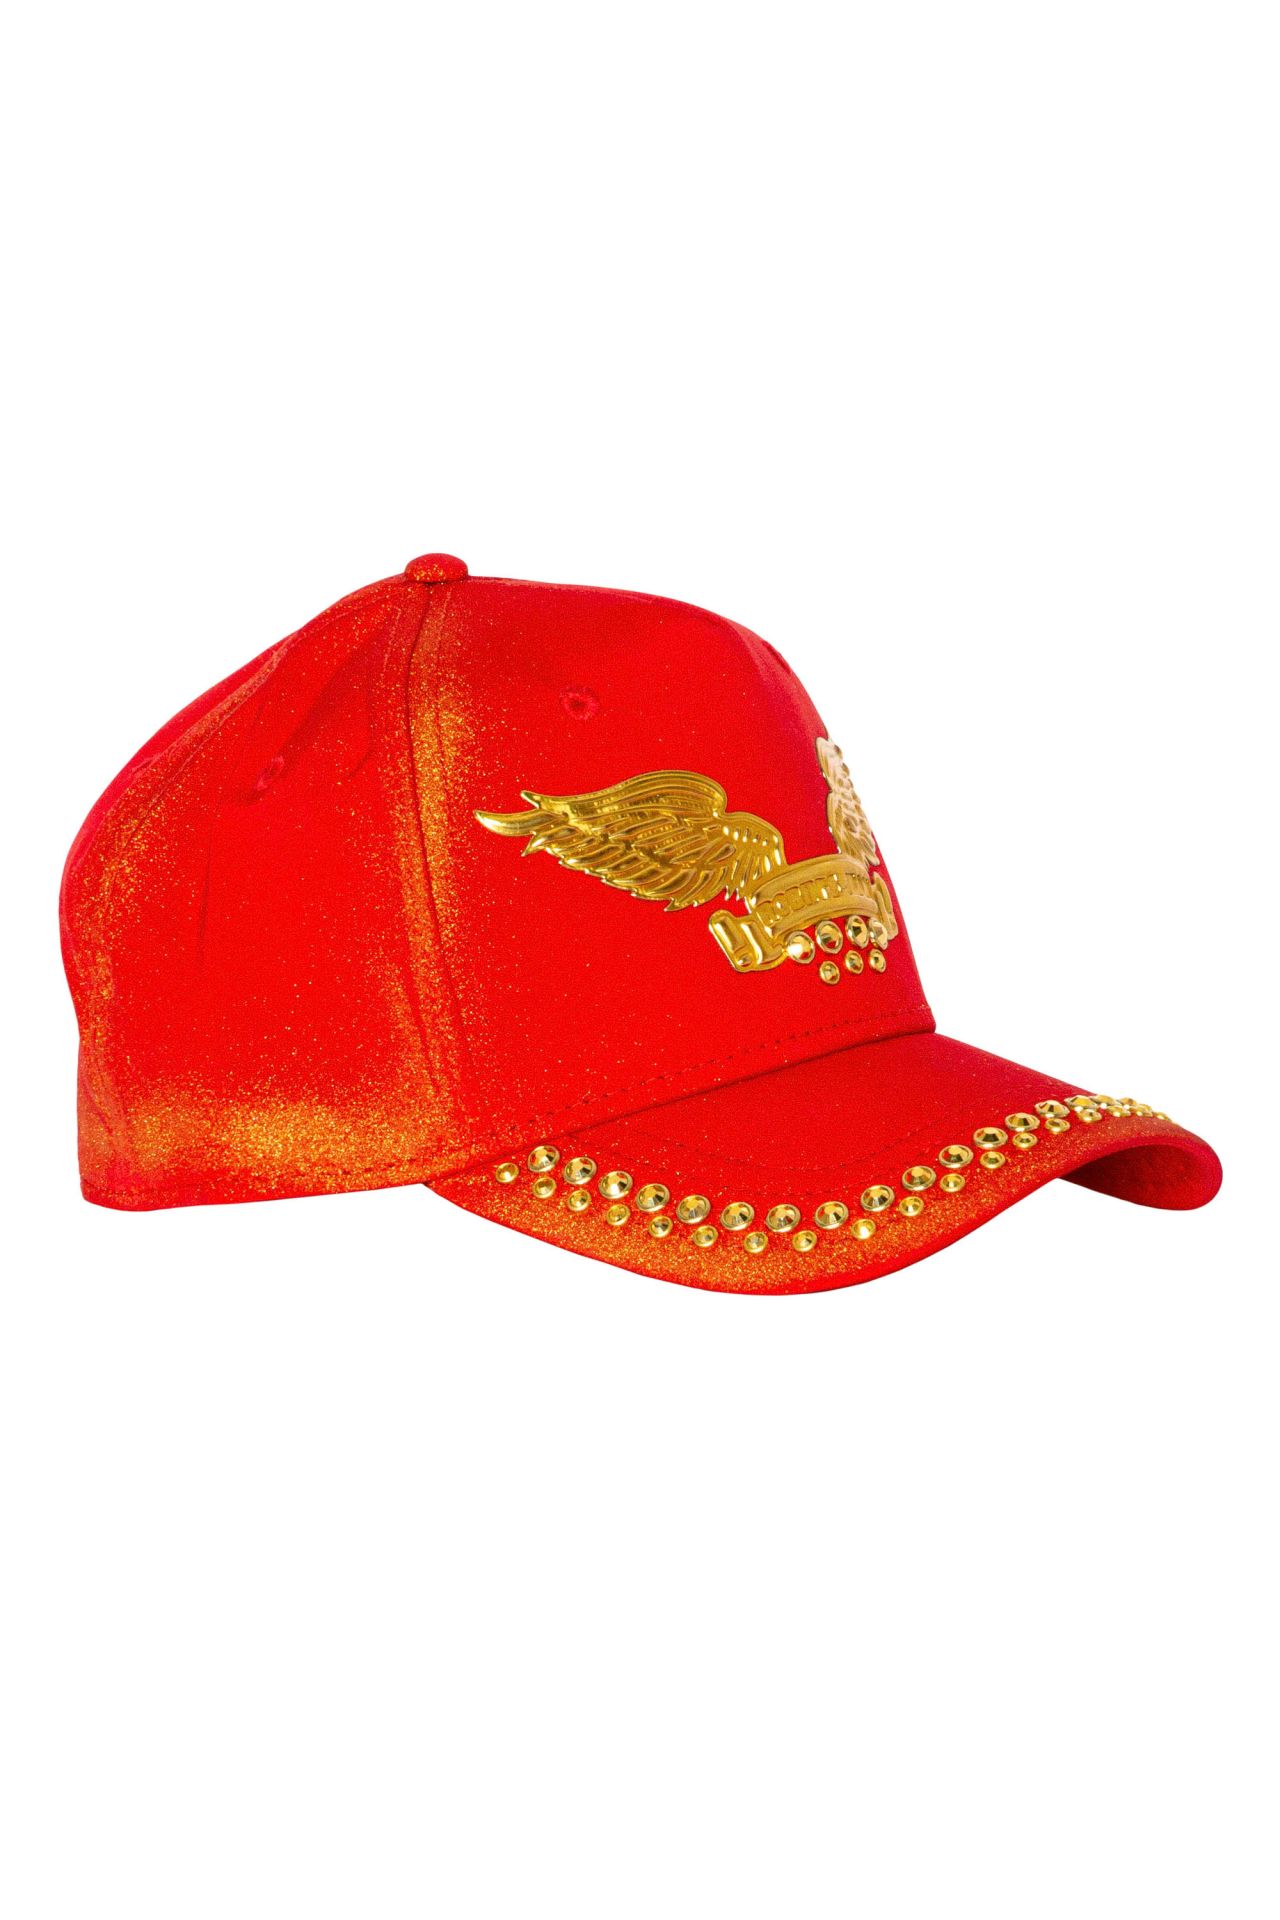 GOLD DUST CAP IN RED WITH GOLD WINGS AND CRYSTALS